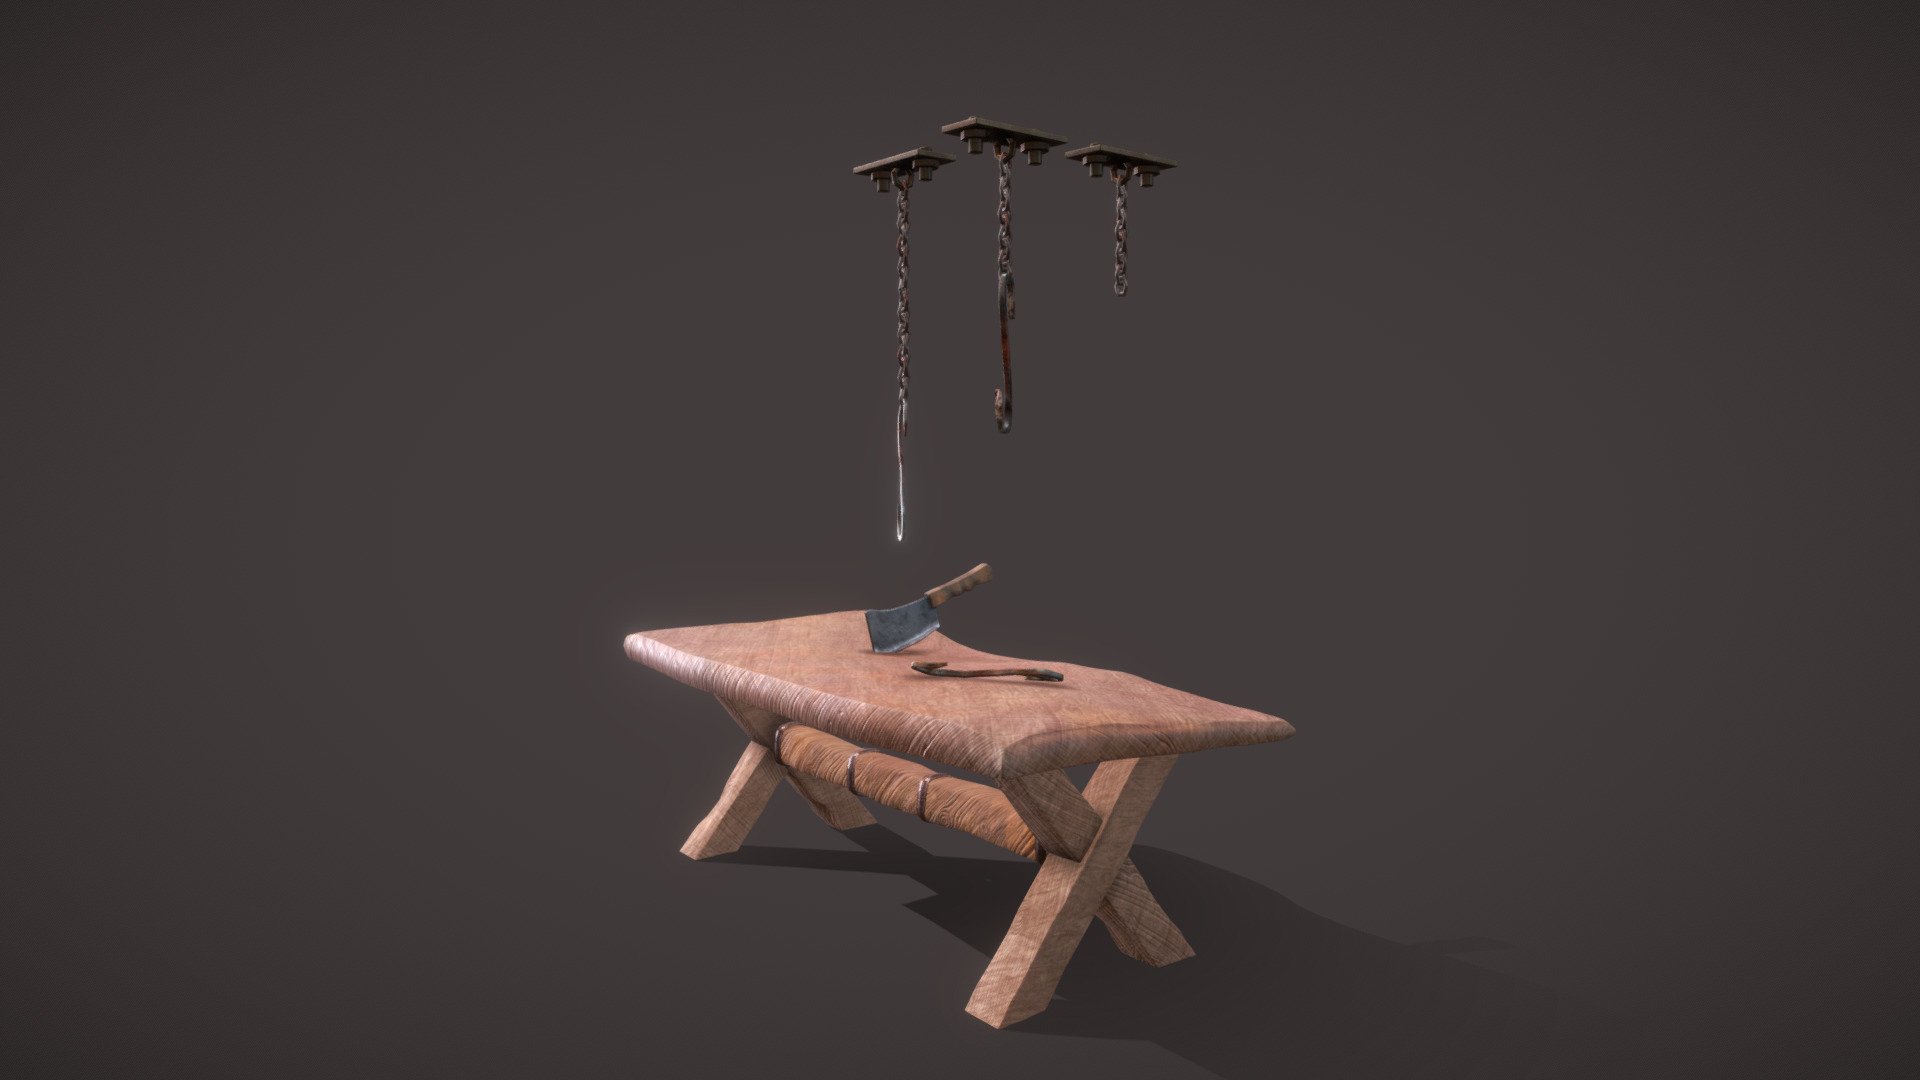 Middle earth butcher table asset set. includes: Table, Chains, Bases, Cleaver - butcherSet - 3D model by Astros (@Astros972) 3d model